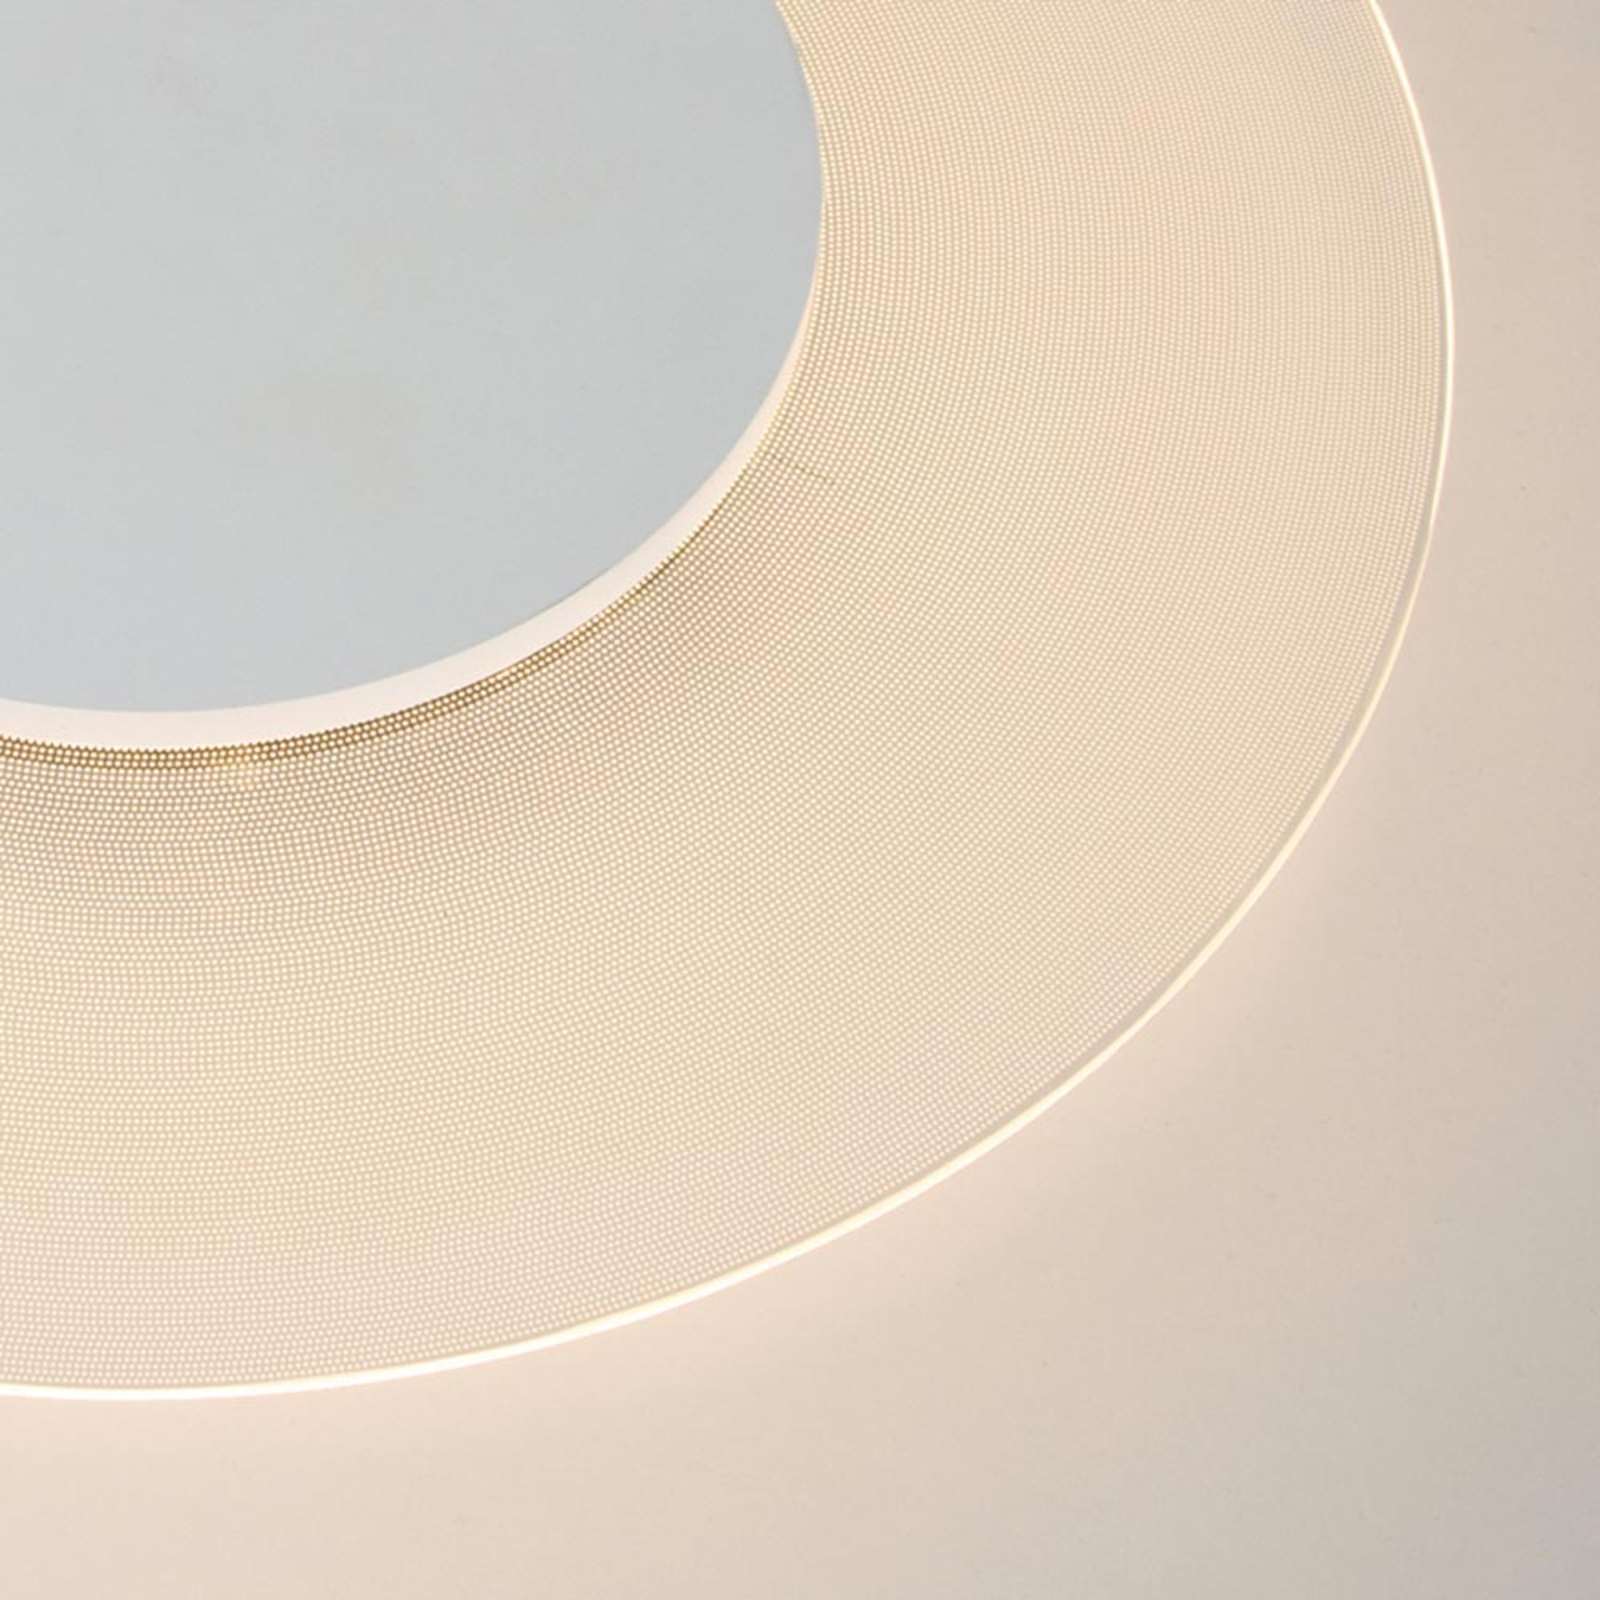 Round LED ceiling light Birma in white, dimmable